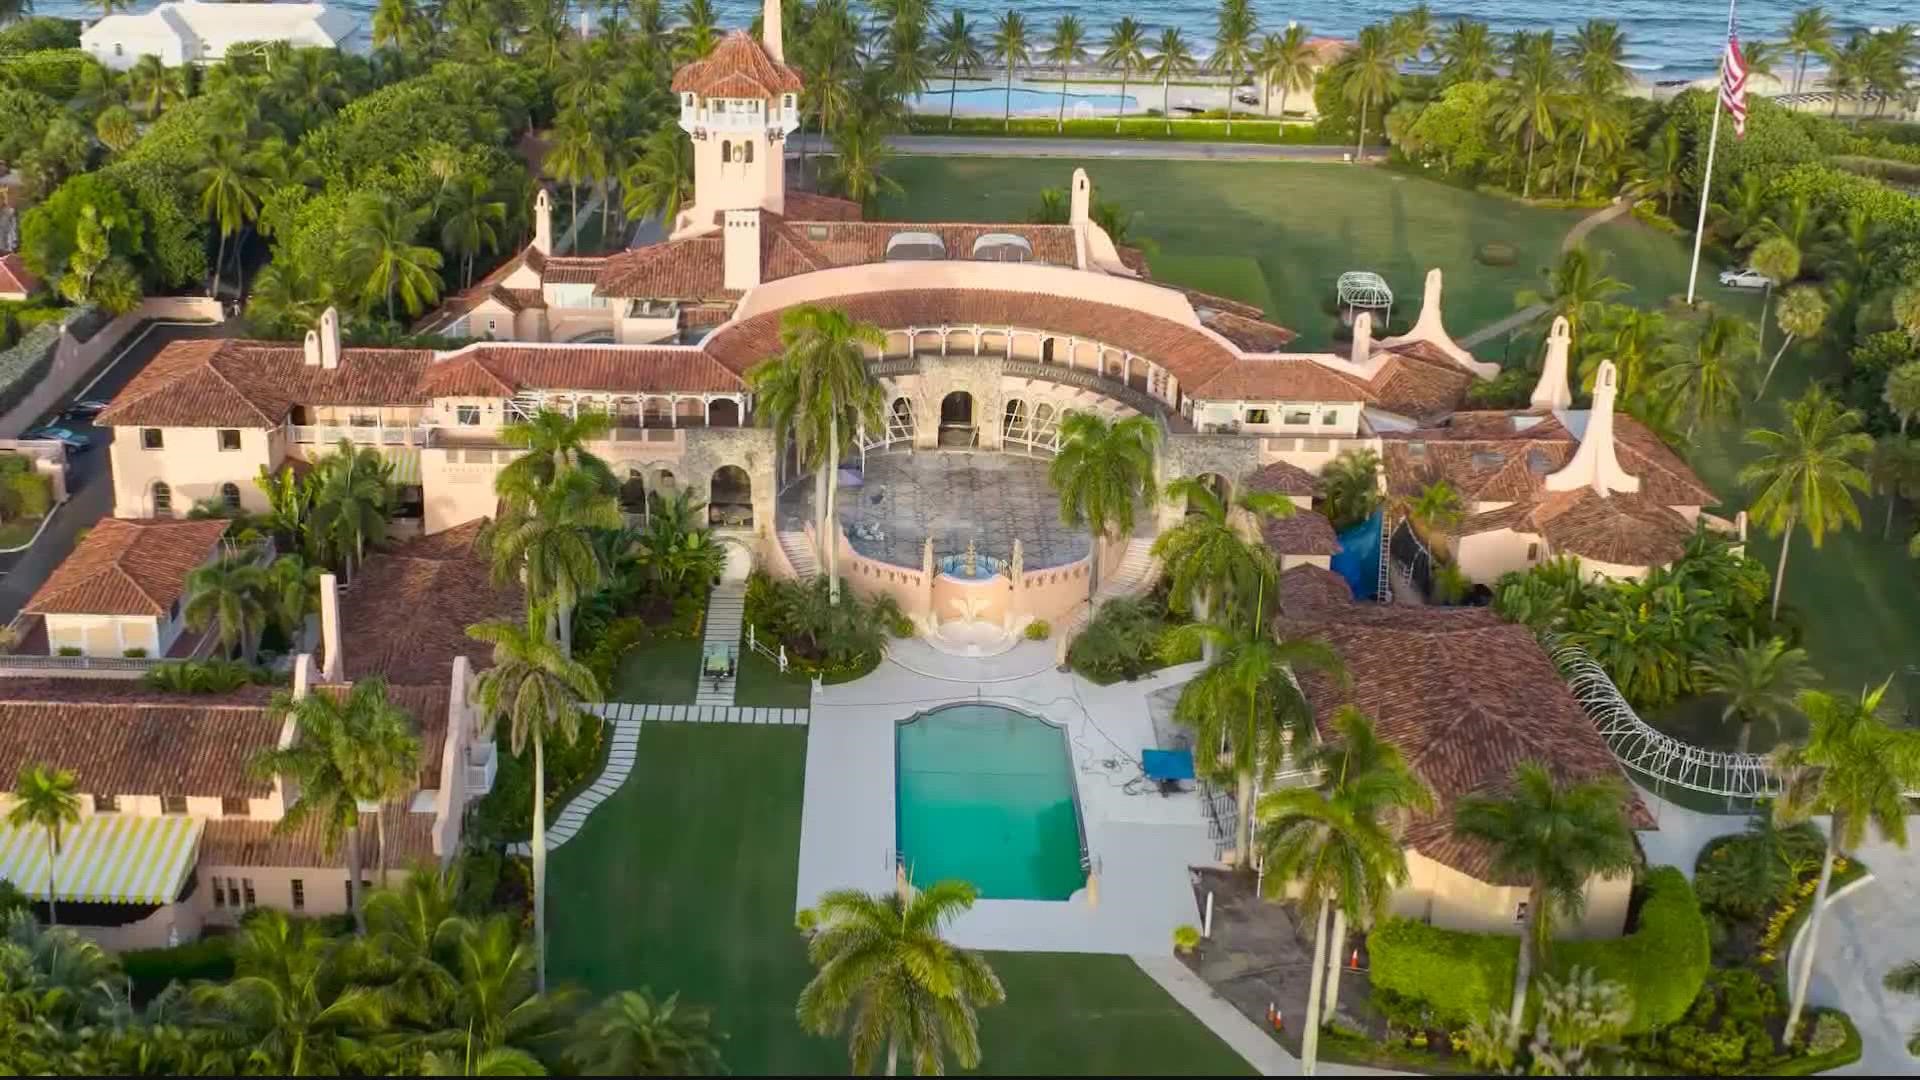 A federal judge may sign off on releasing part of the affadavit that led to the FBI's search of former President Trump's Mar-a-Lago estate